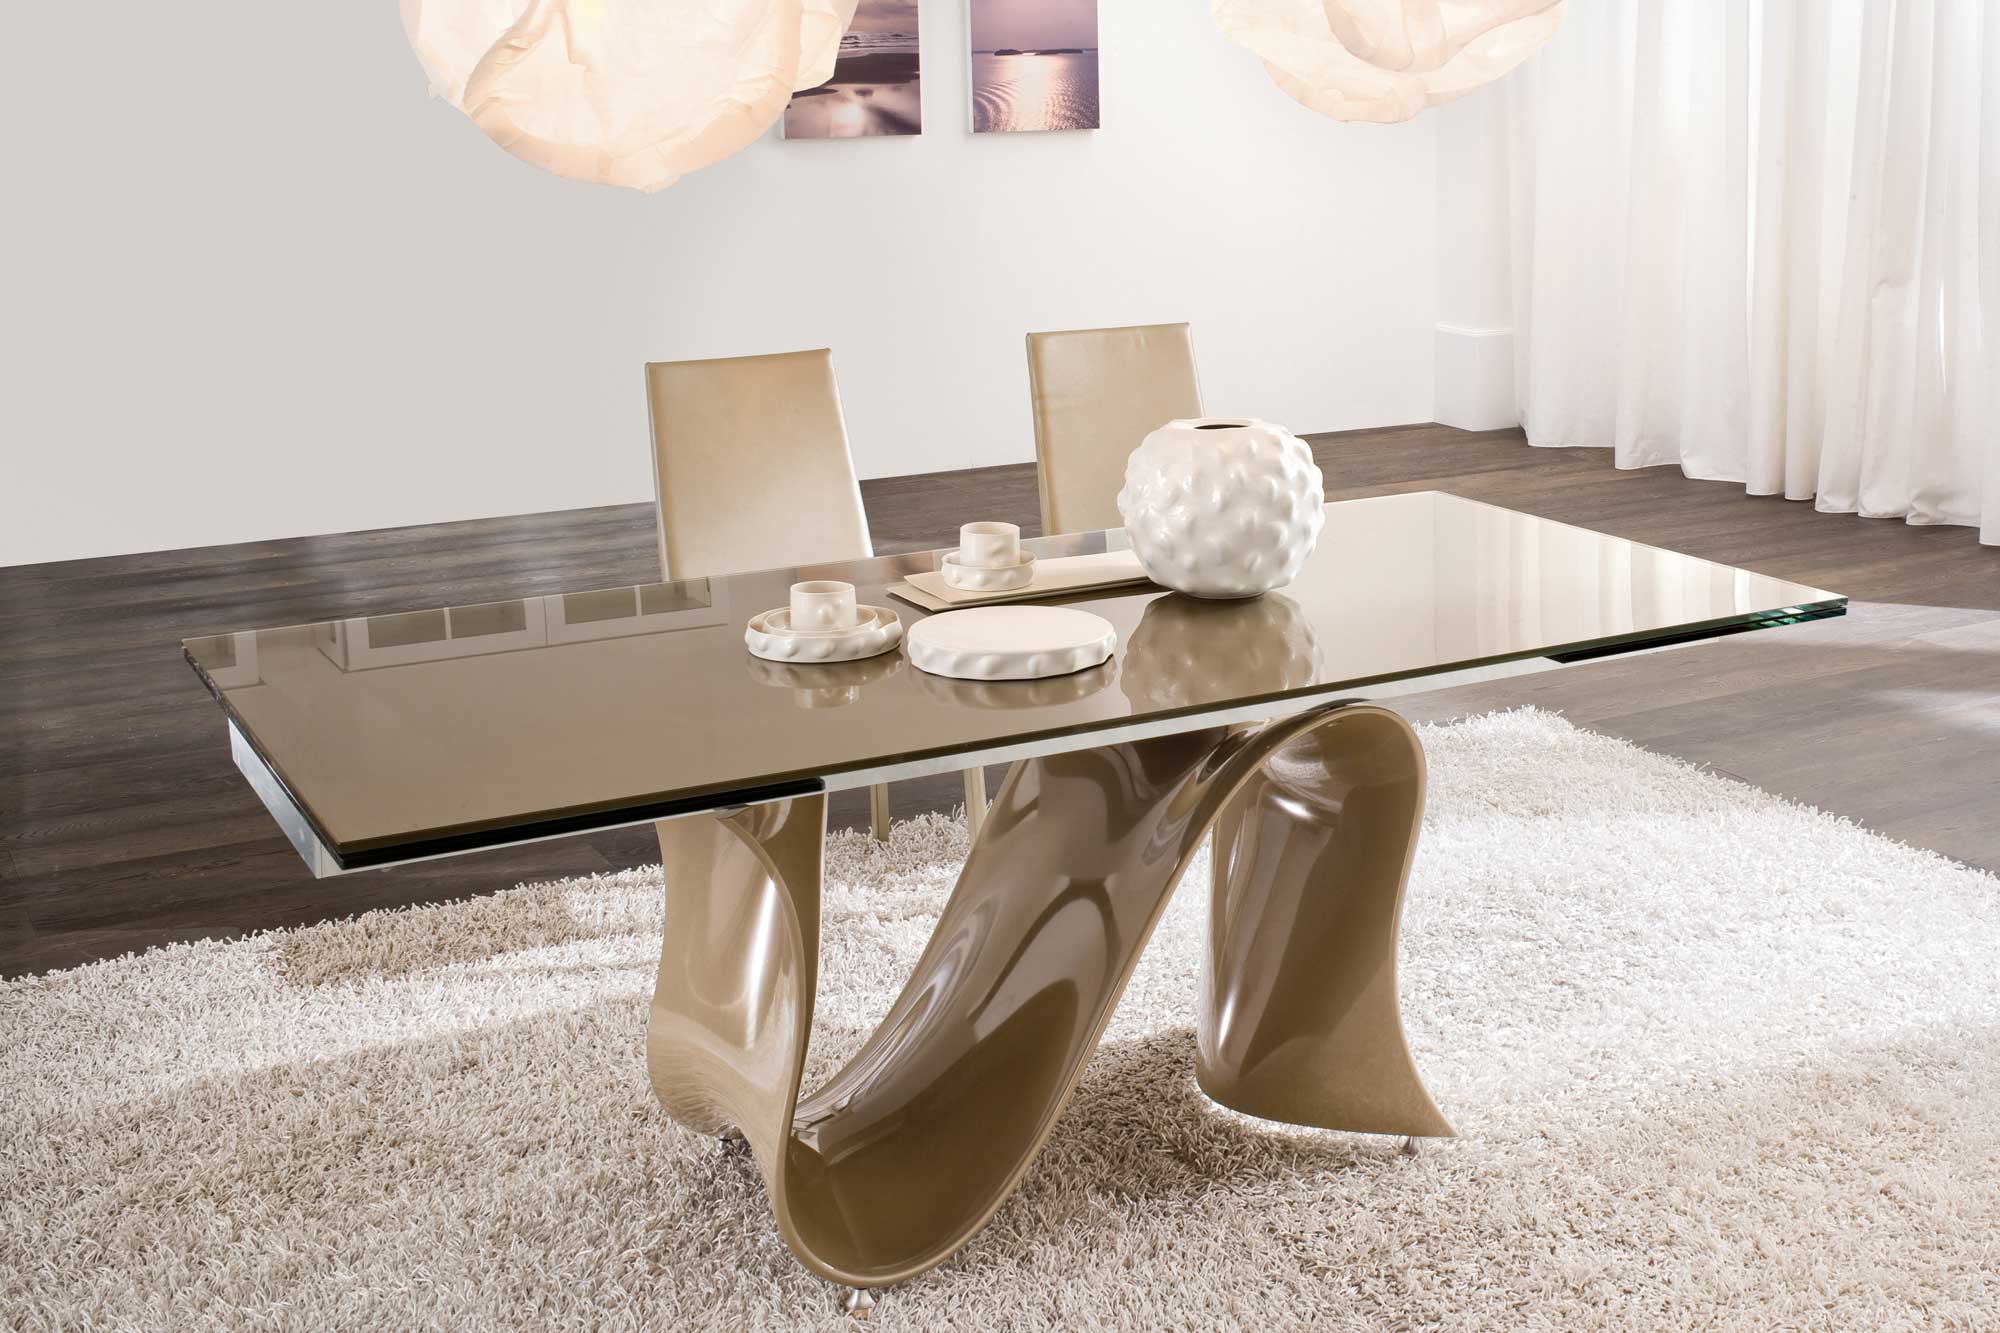 Dining Room Cream Modern Dining Room Chairs In Cream Color Facing Stunning Dining Table Under Fabulous Ceiling Lamps Dining Room Modern Dining Room Chairs Chosen For Stylish And Open Dining Area